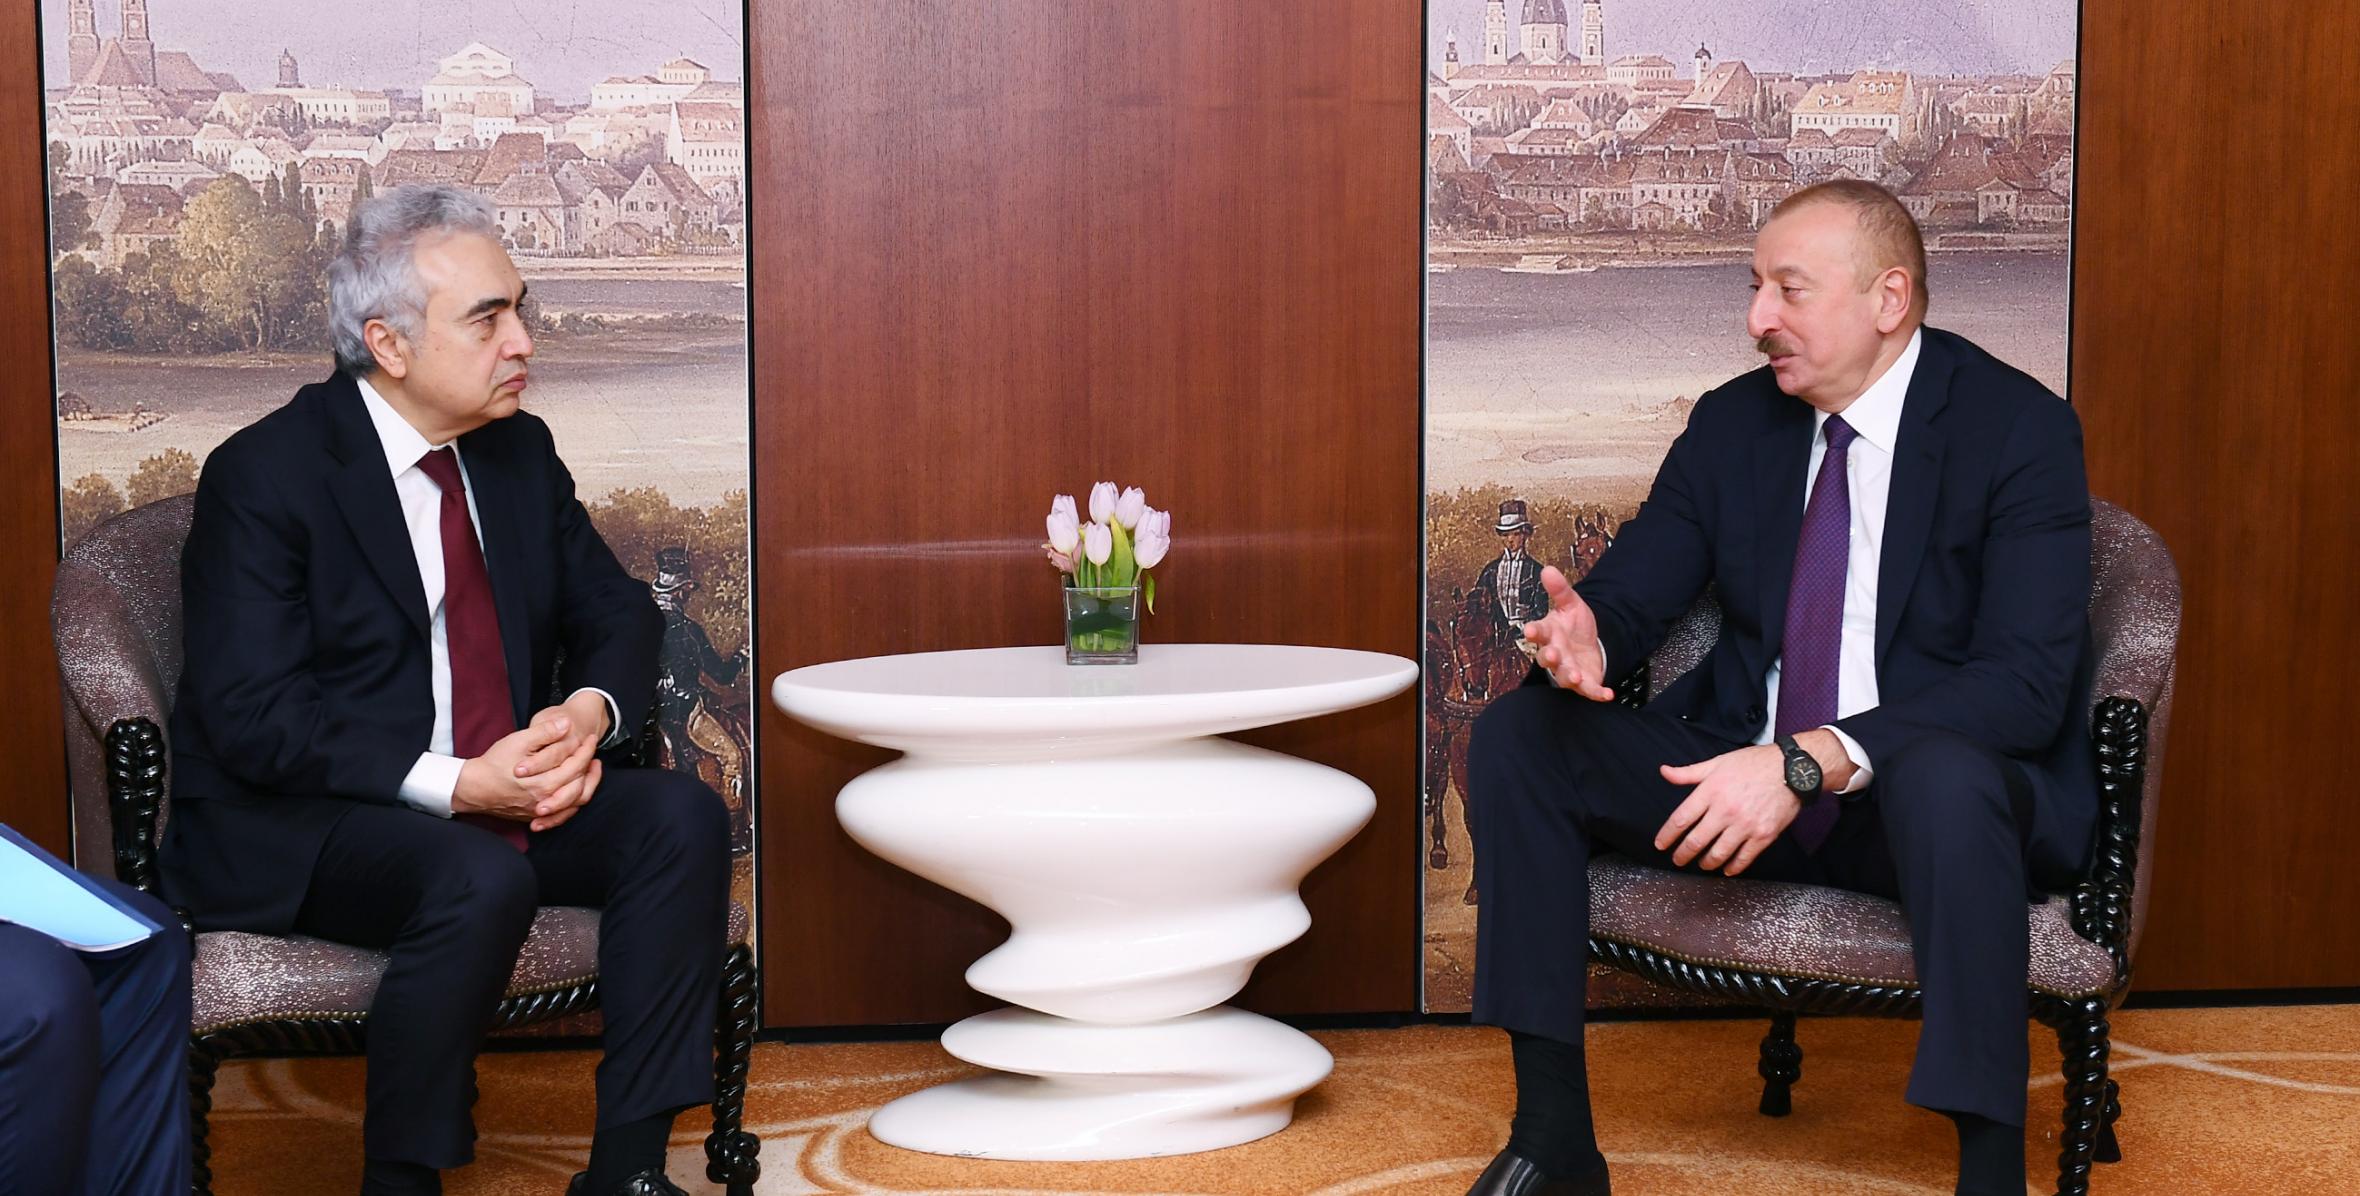 Ilham Aliyev met with Executive Director of International Energy Agency in Munich